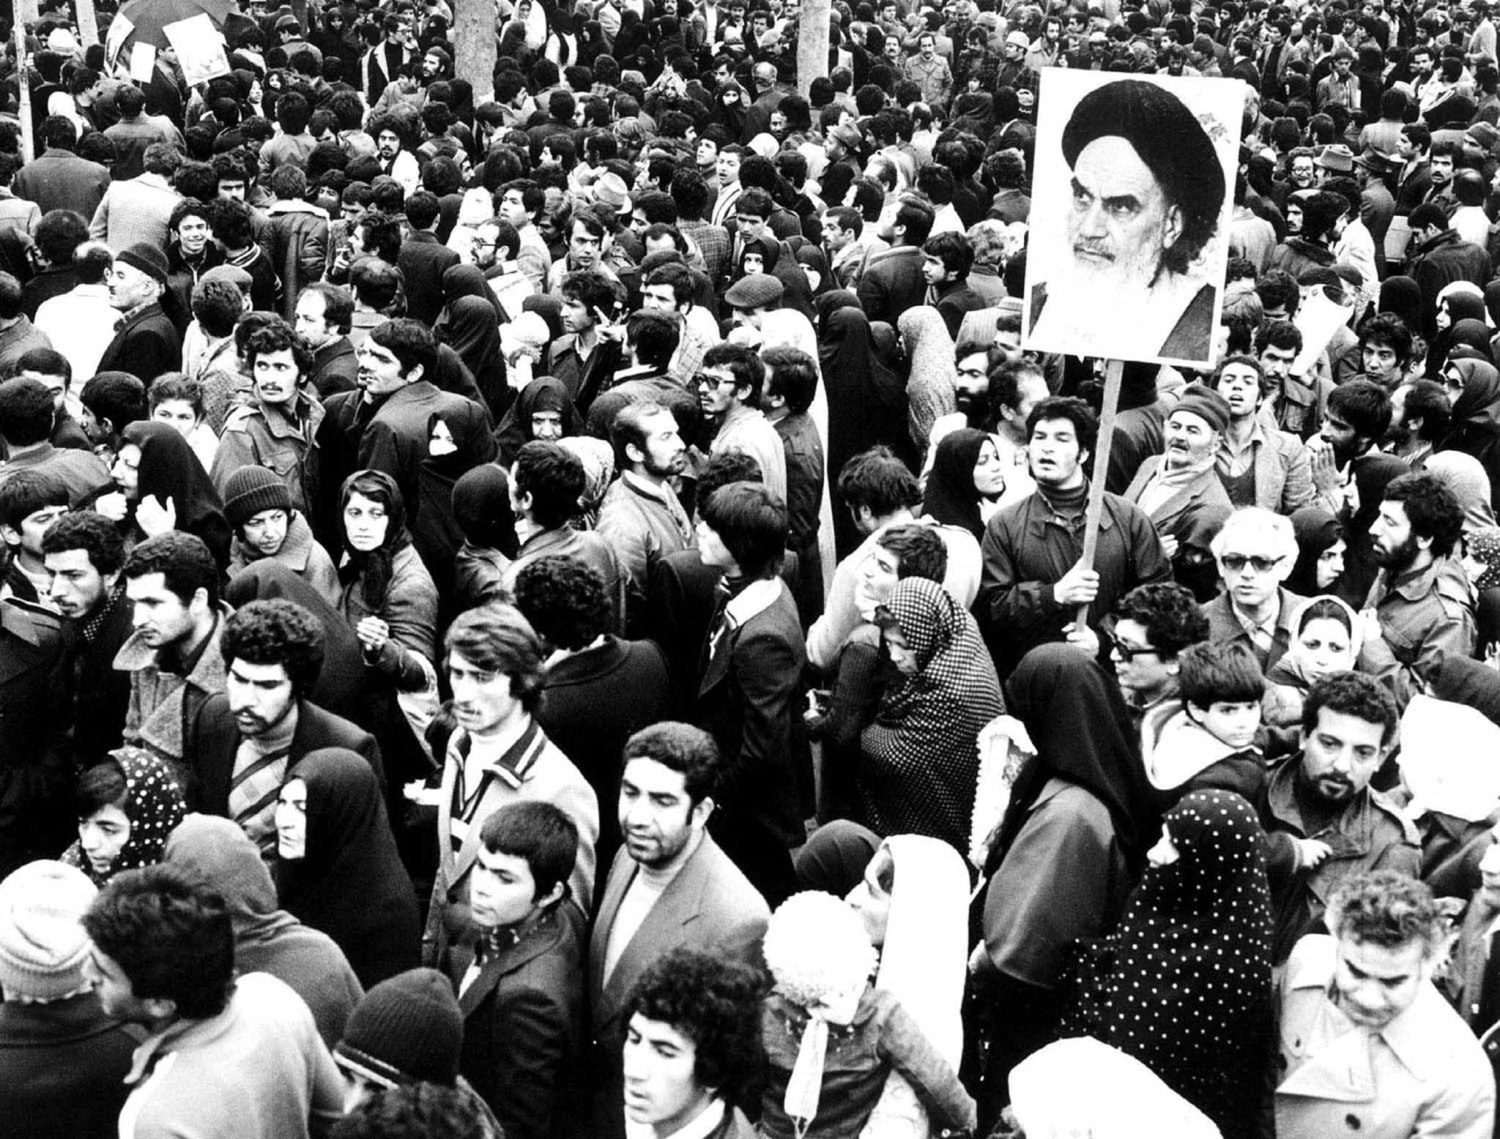 FILE PHOTO OF FEBRUARY 1979 - Supporters of the leader and founder of the Islamic revolution Ayatollah Khomeini hold his picture in Tehran during the country's revolution in February 1979. Iraninans celebrate the 20th anniverssary of the Revolution this week.DS/WS - RP1DRIHULAAA